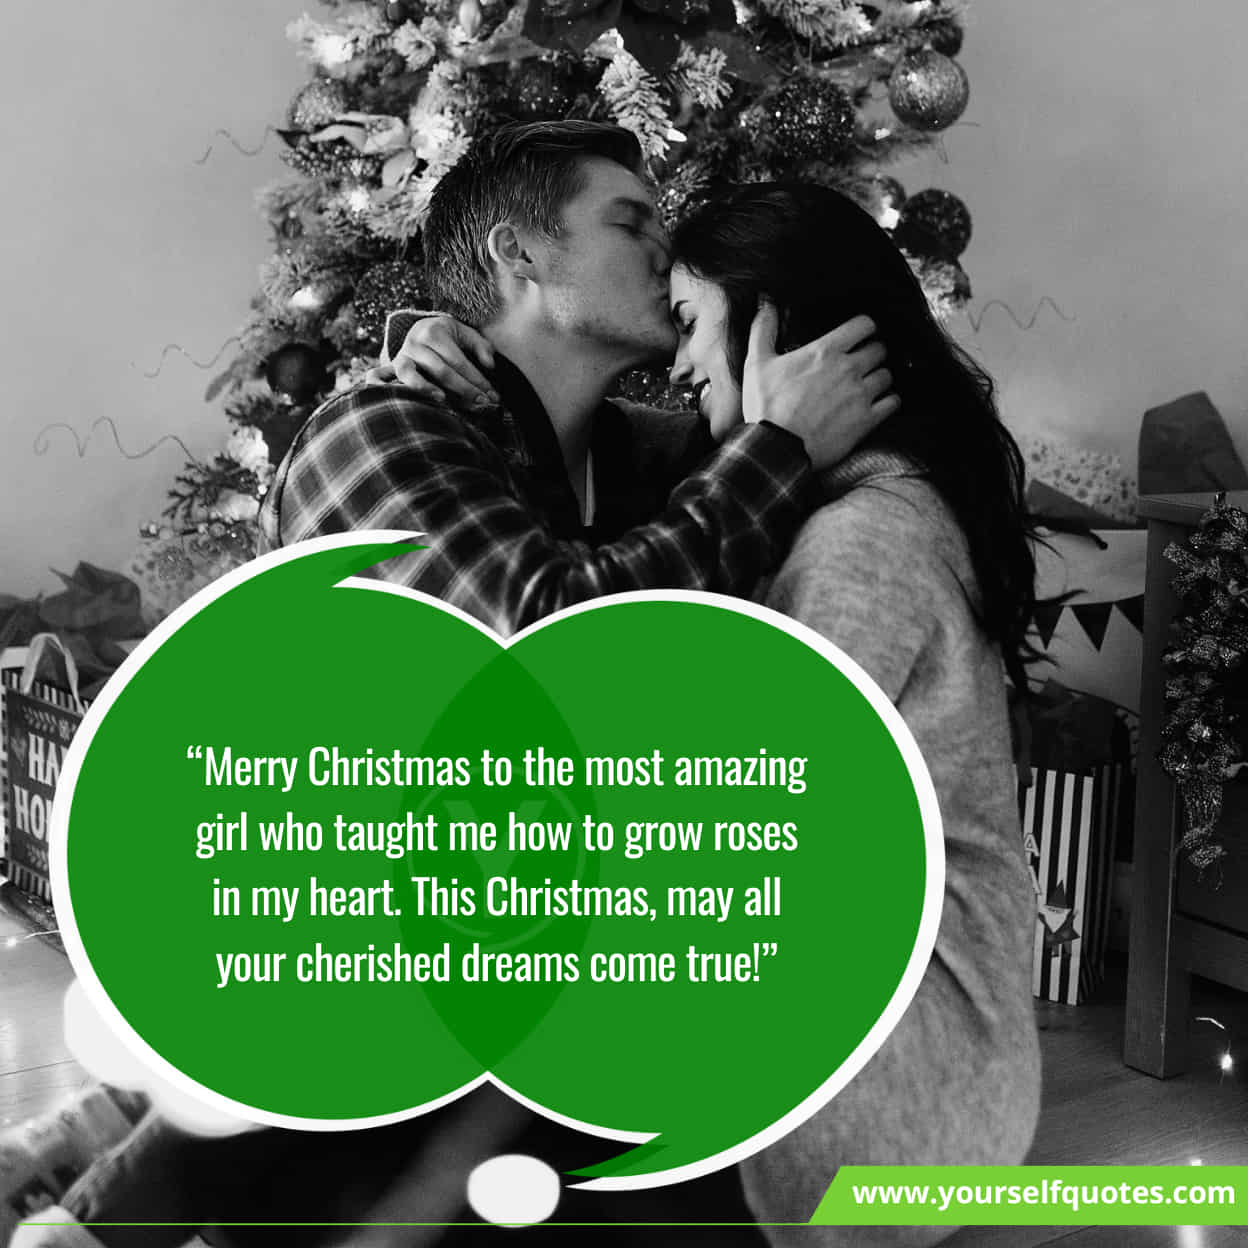 Top Xmas Wishes for Wife, Life Partner